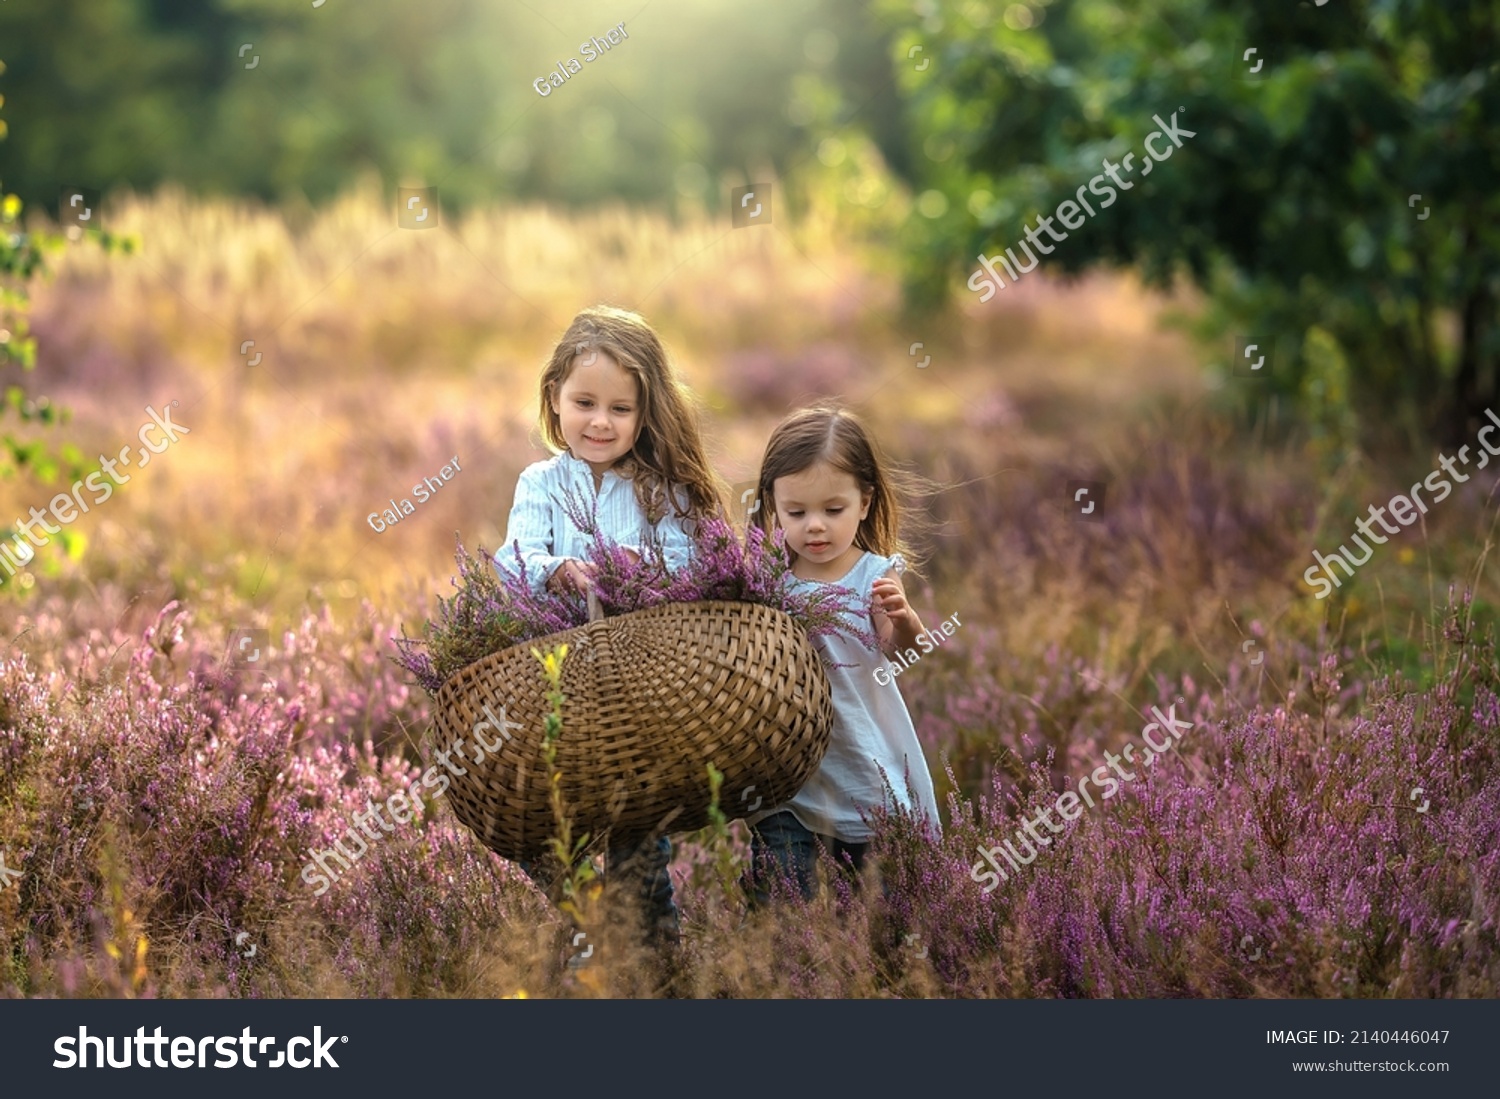 Beautiful girls with a bouquet of heather in a heather field. Beautiful sisters with a basket of heather are walking across the field and smiling.  #2140446047